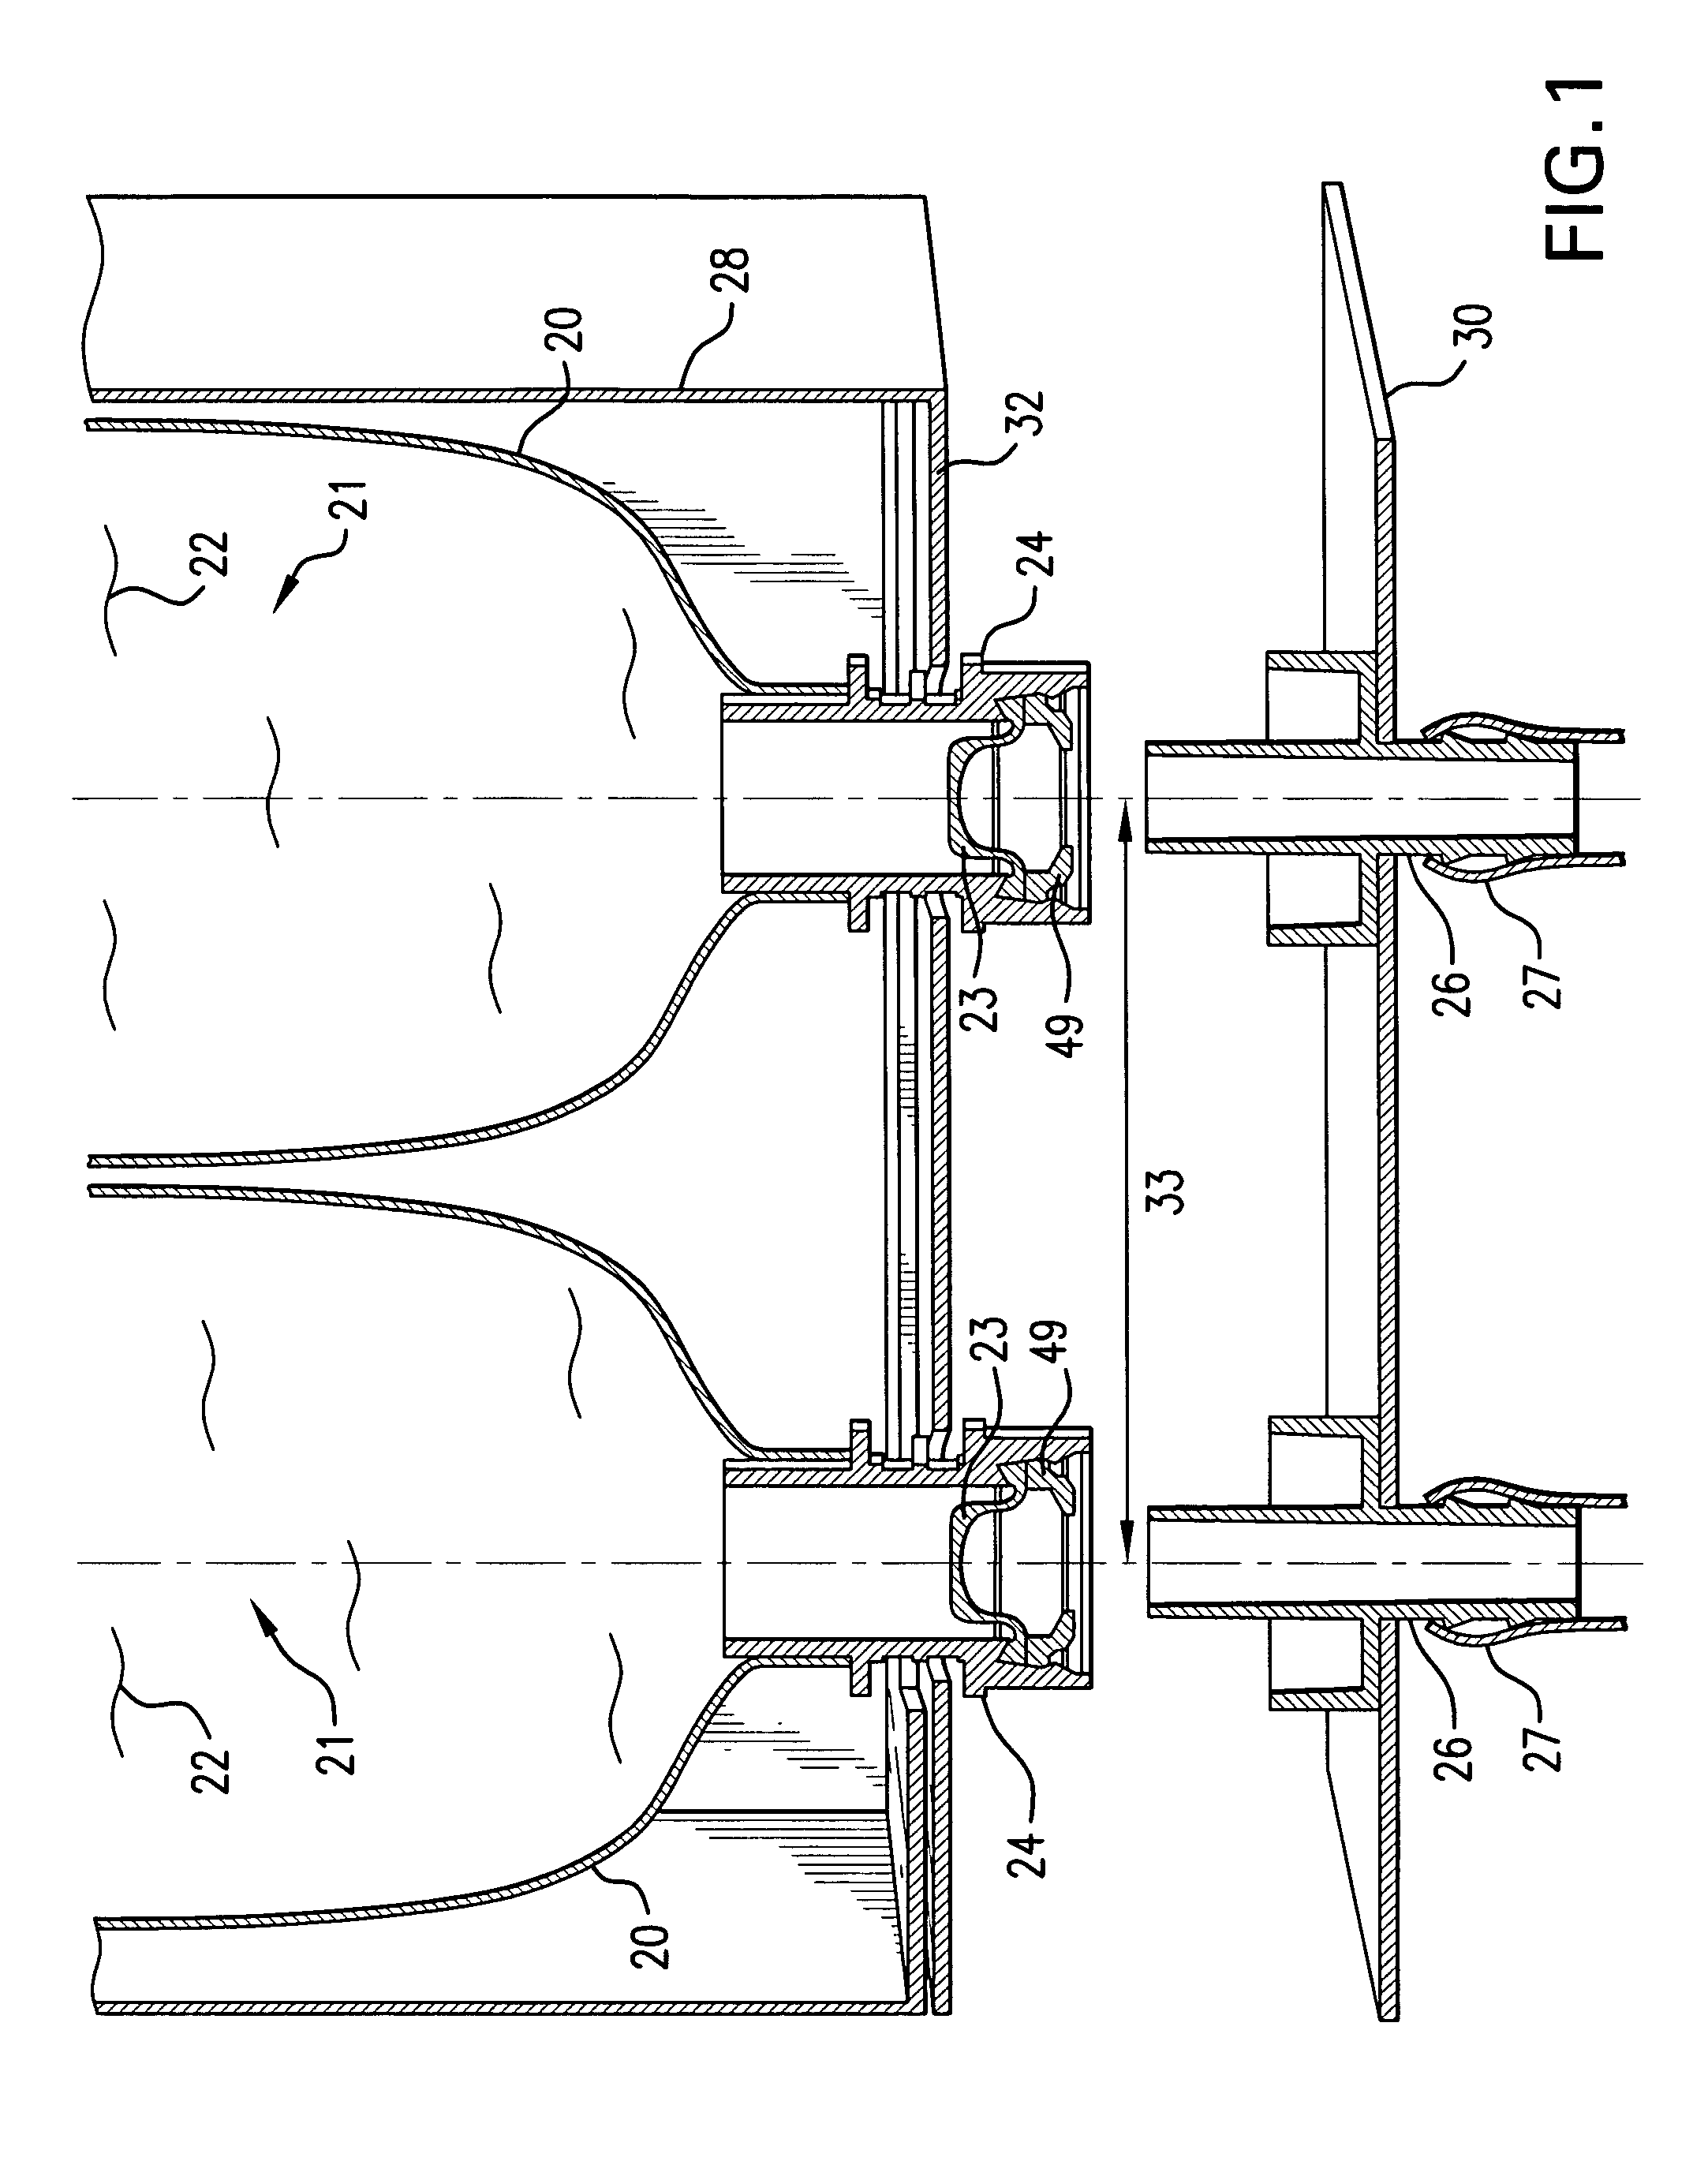 Device and method for dispensing a food product using a reclosable resilient valve